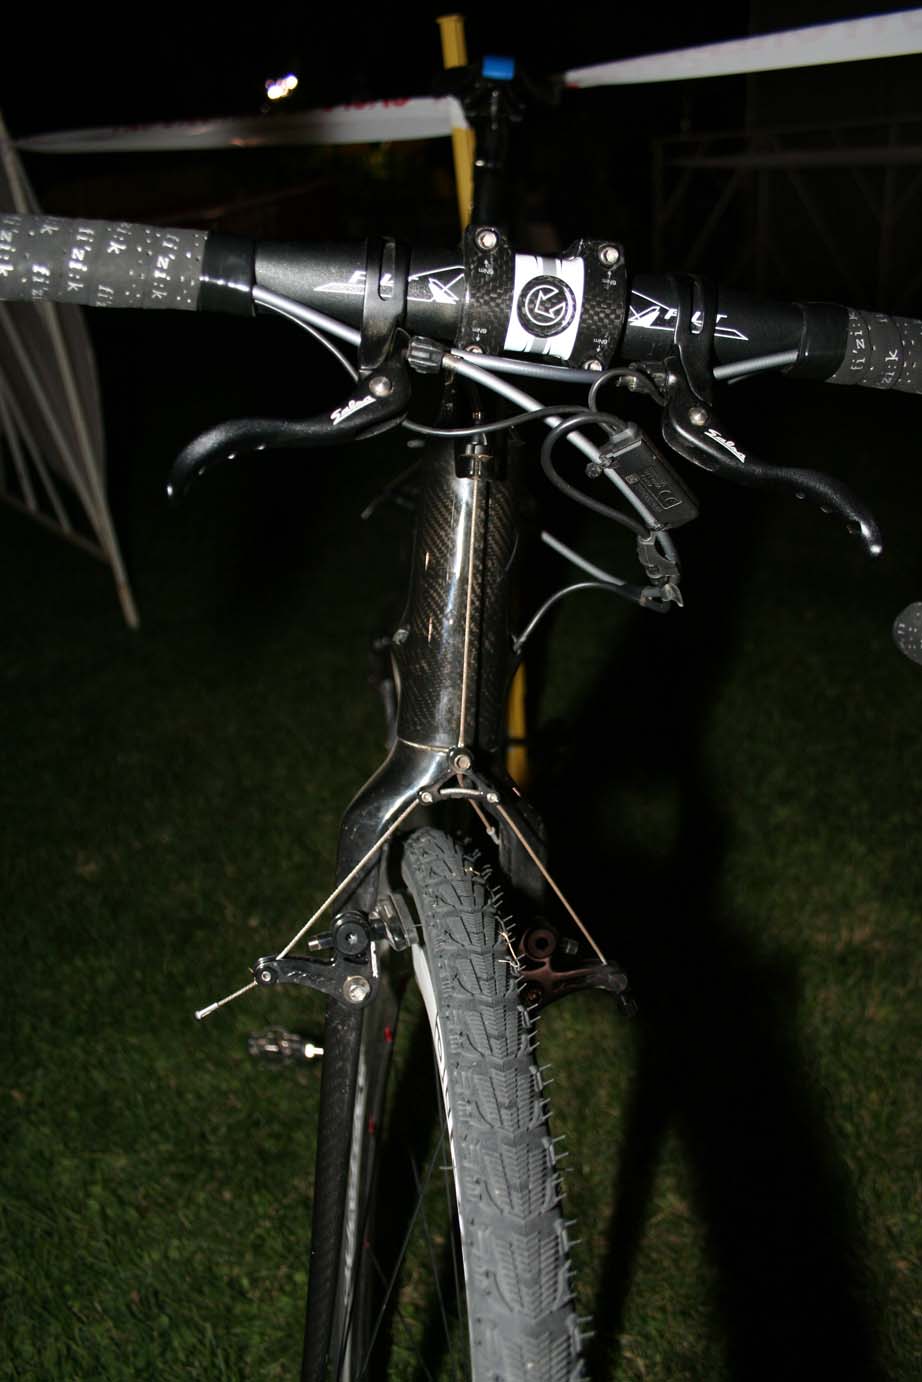 Craig ran some bar-top levers, making his 'cross ride feel more like a mountain bike. by Andrew Yee